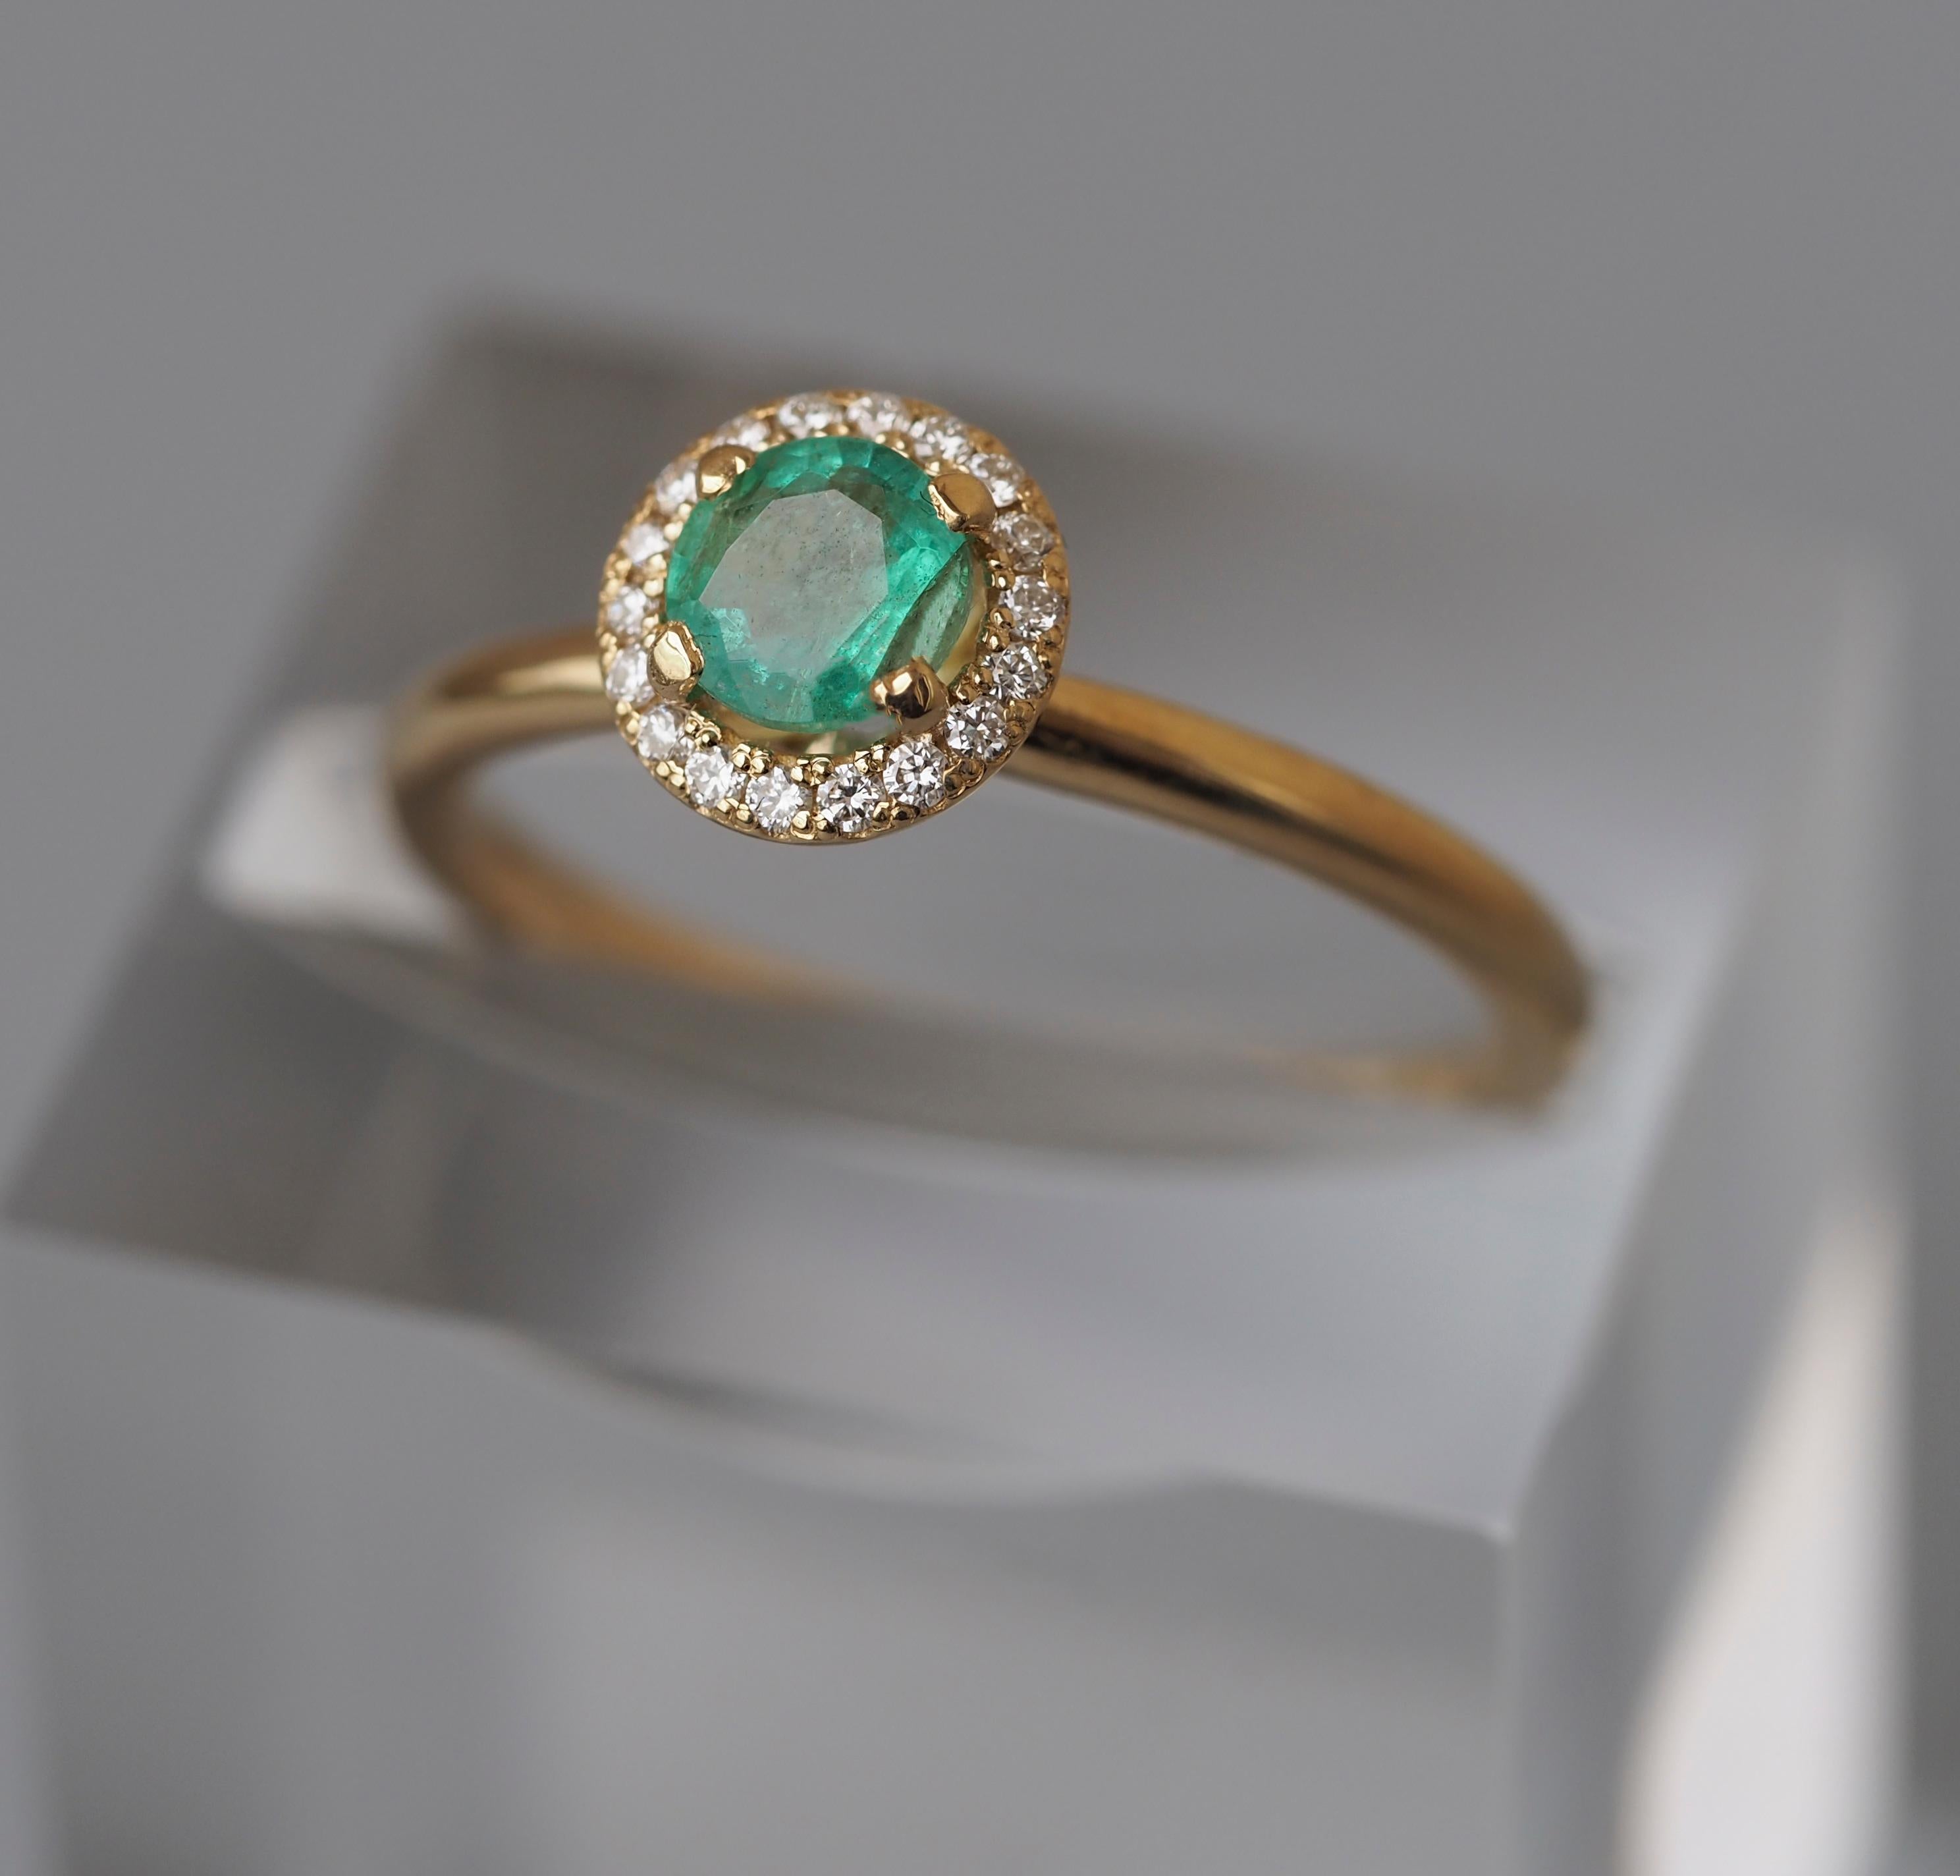 14k Gold Ring with Emerald and Diamonds, Emerald Halo Ring 4